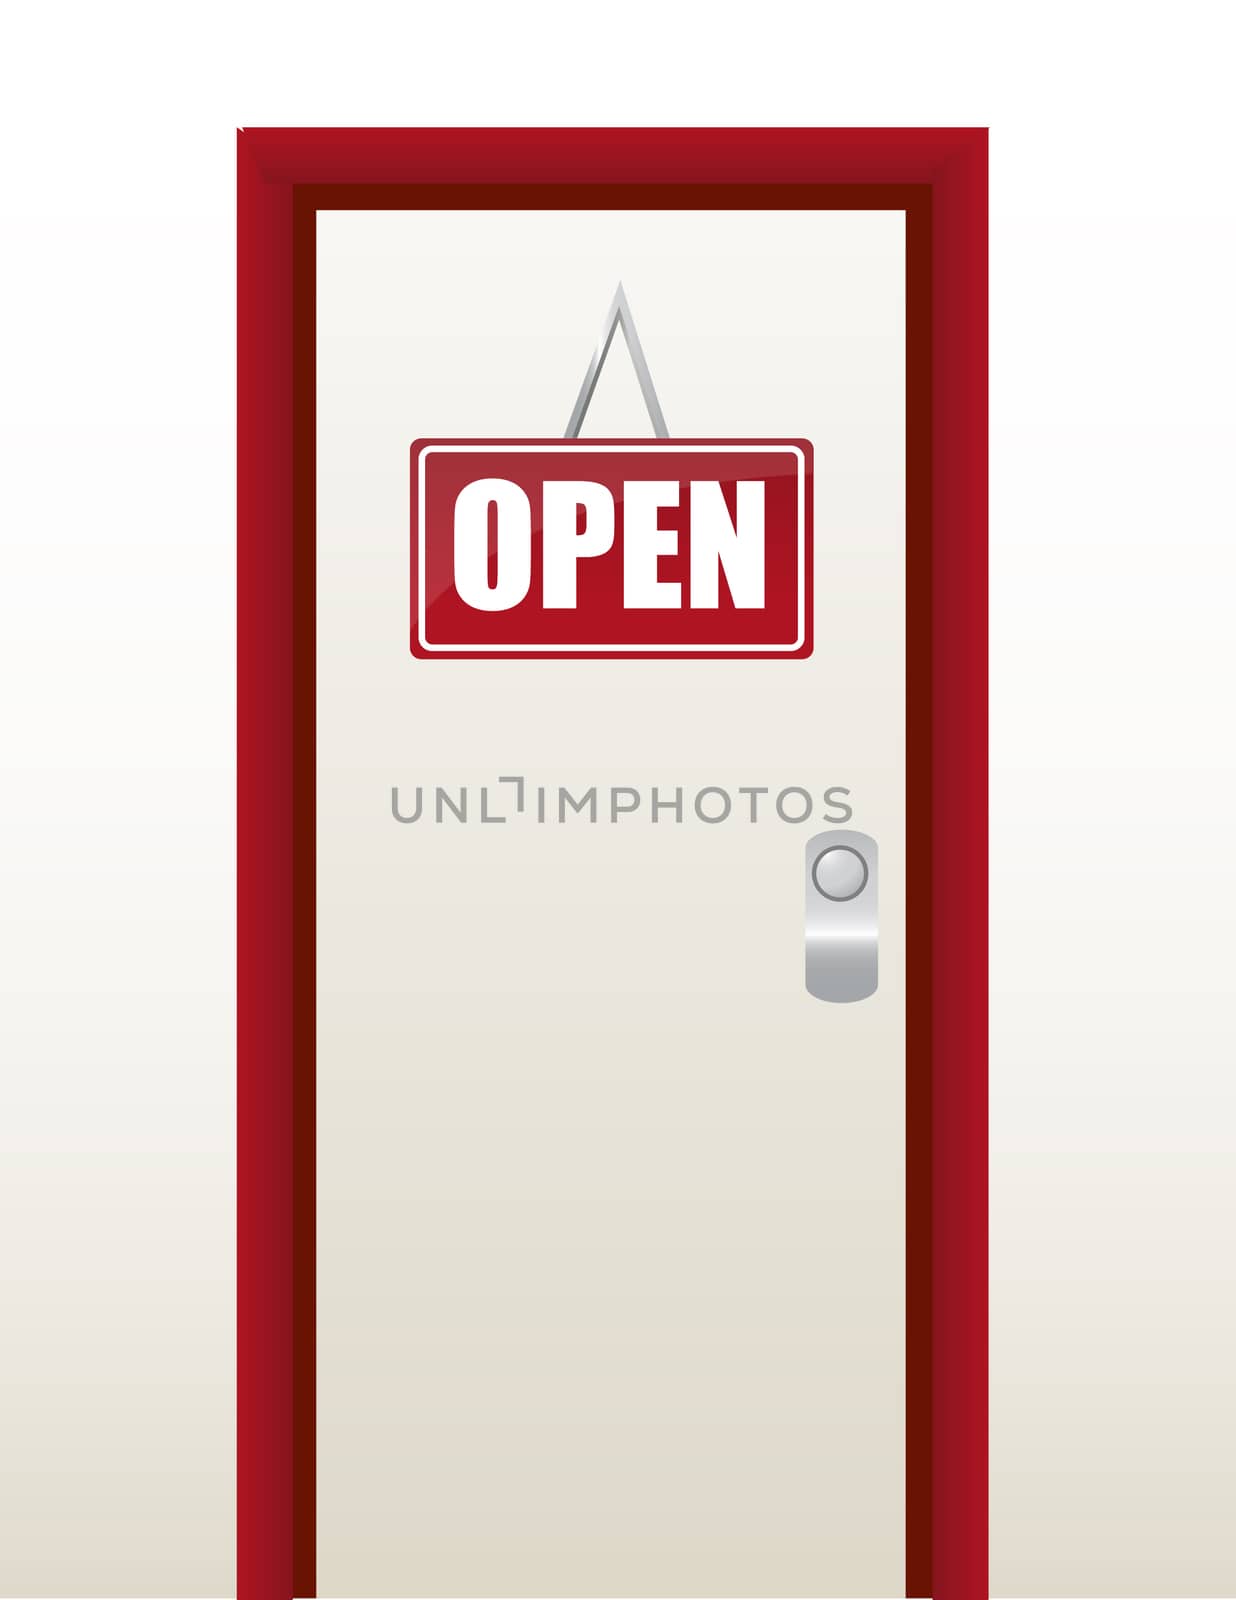 Red and white open sign illustration design